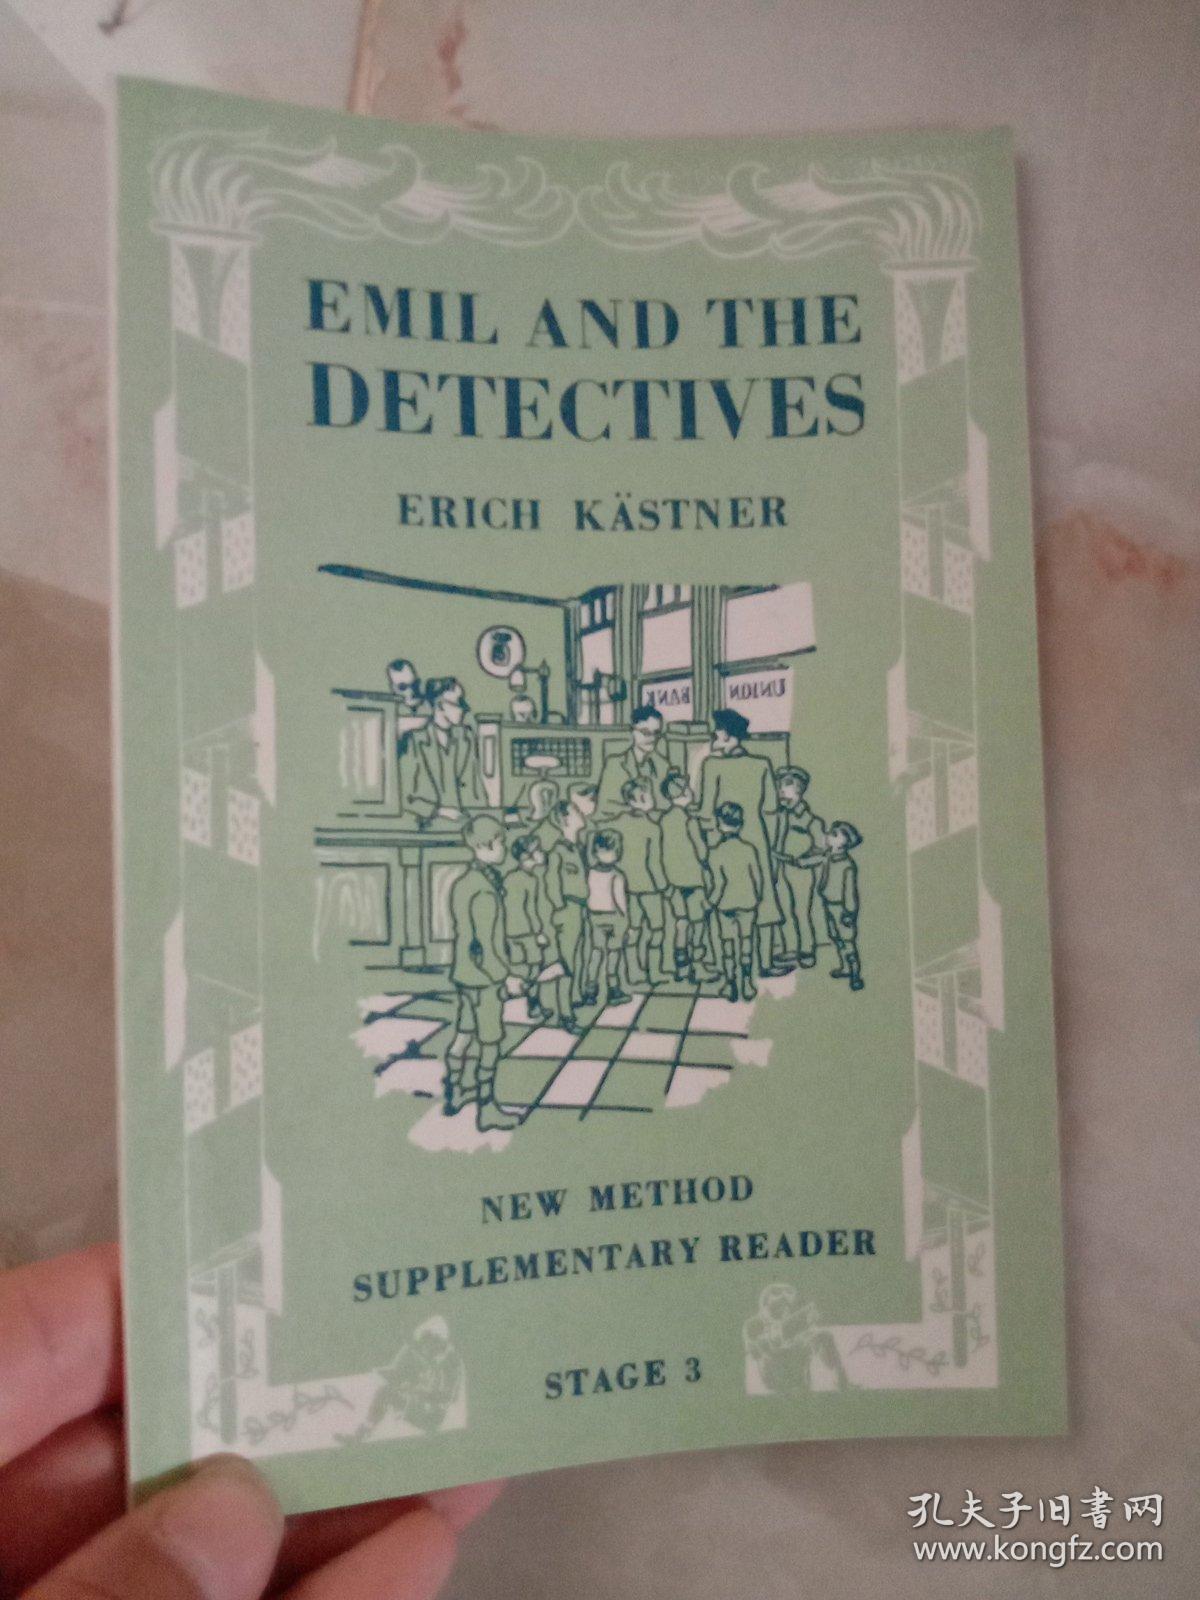 EMIL AND THE DETECTIVES